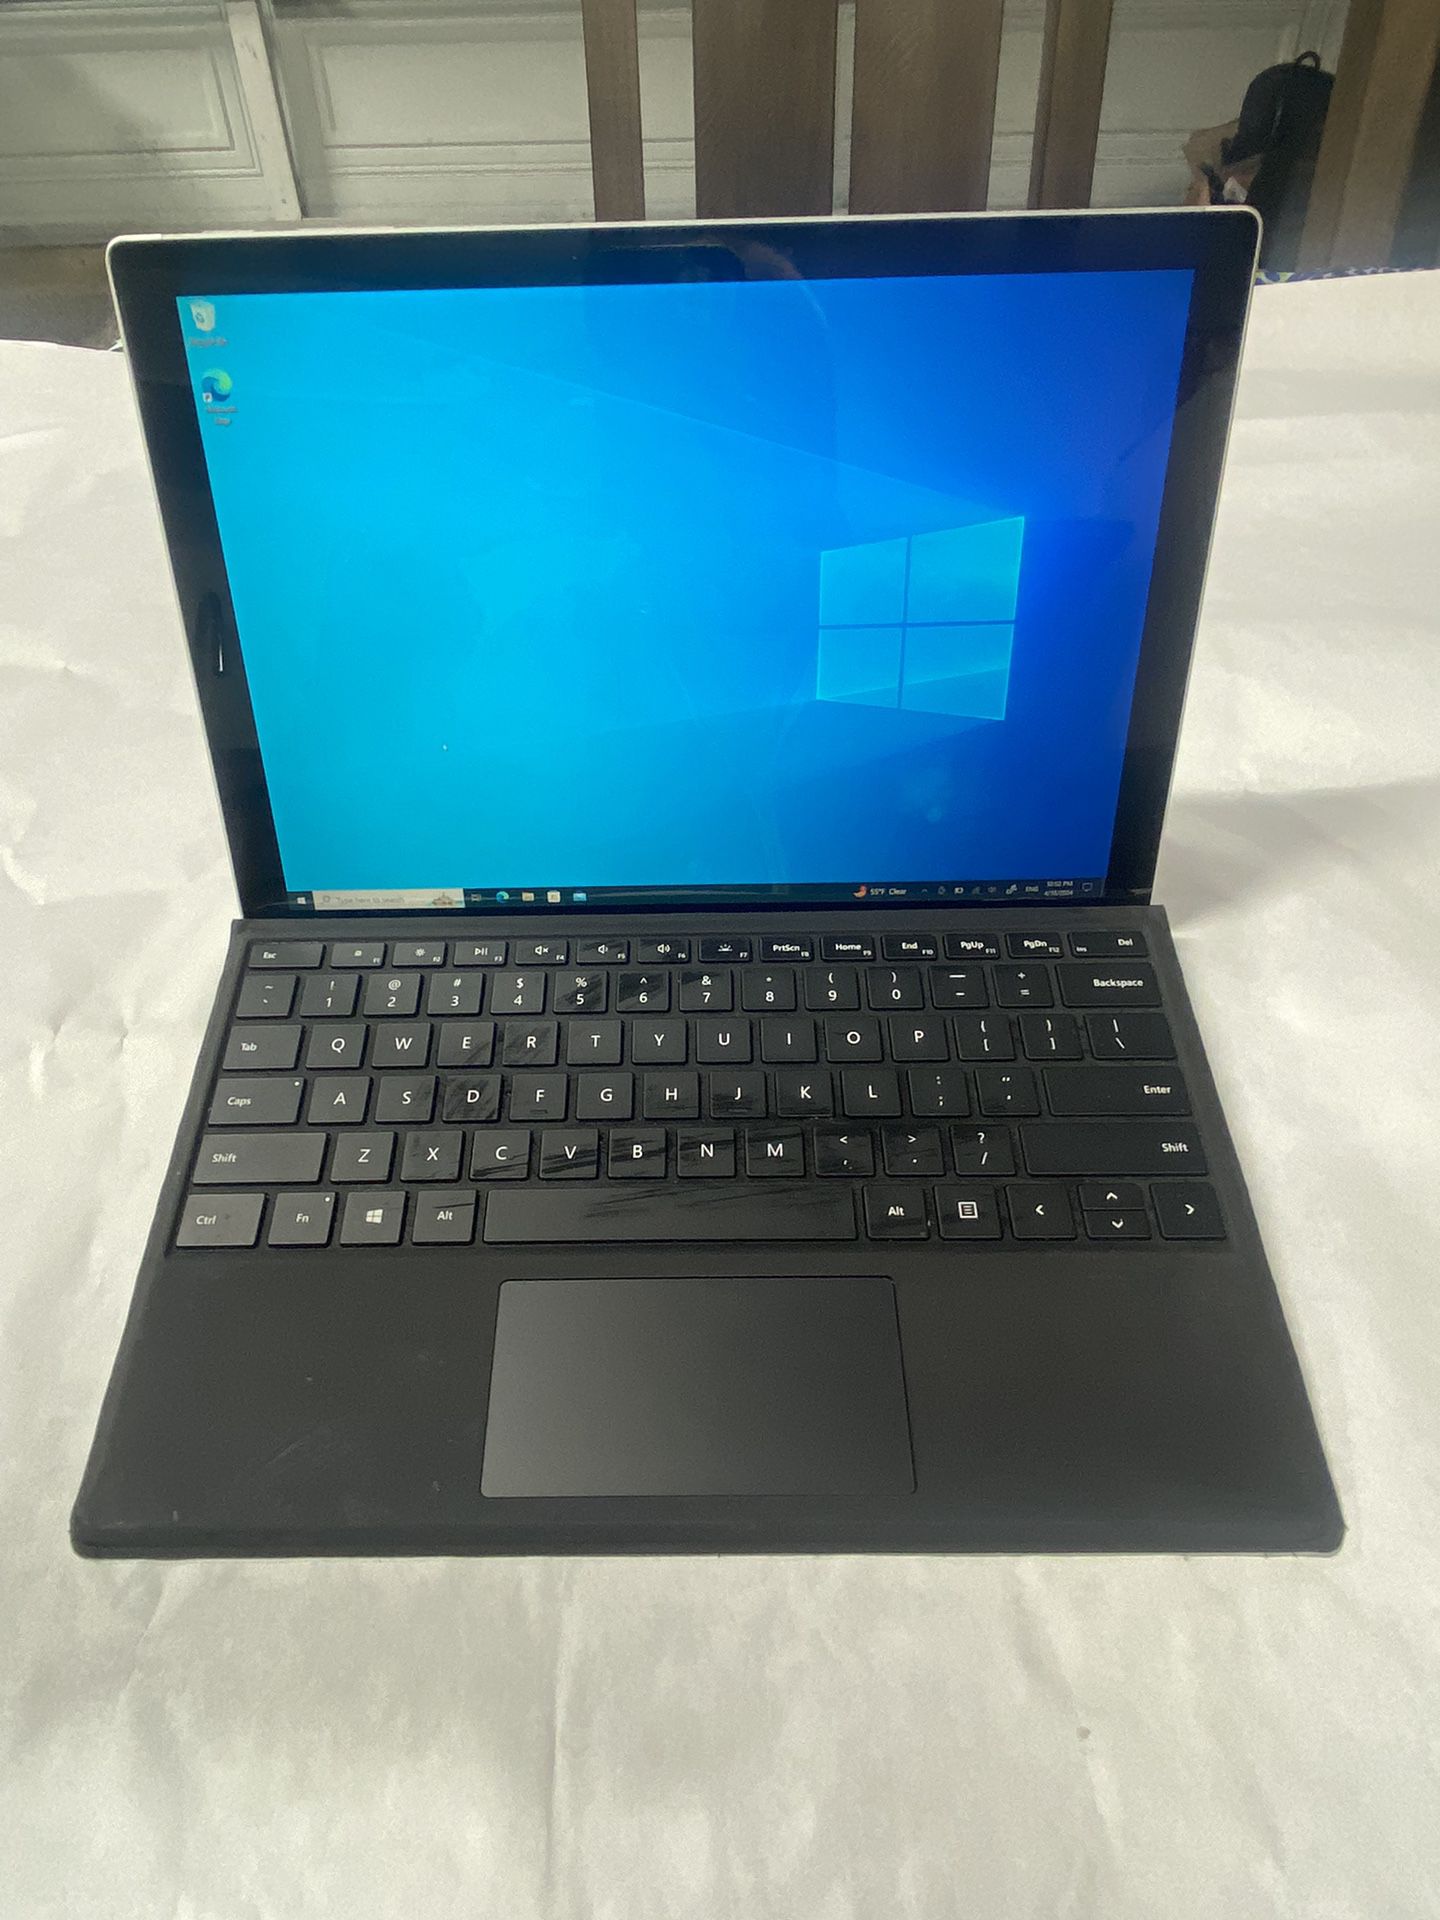 Microsoft Tablet 1866  7pro.10th Generation  With Keyboard 